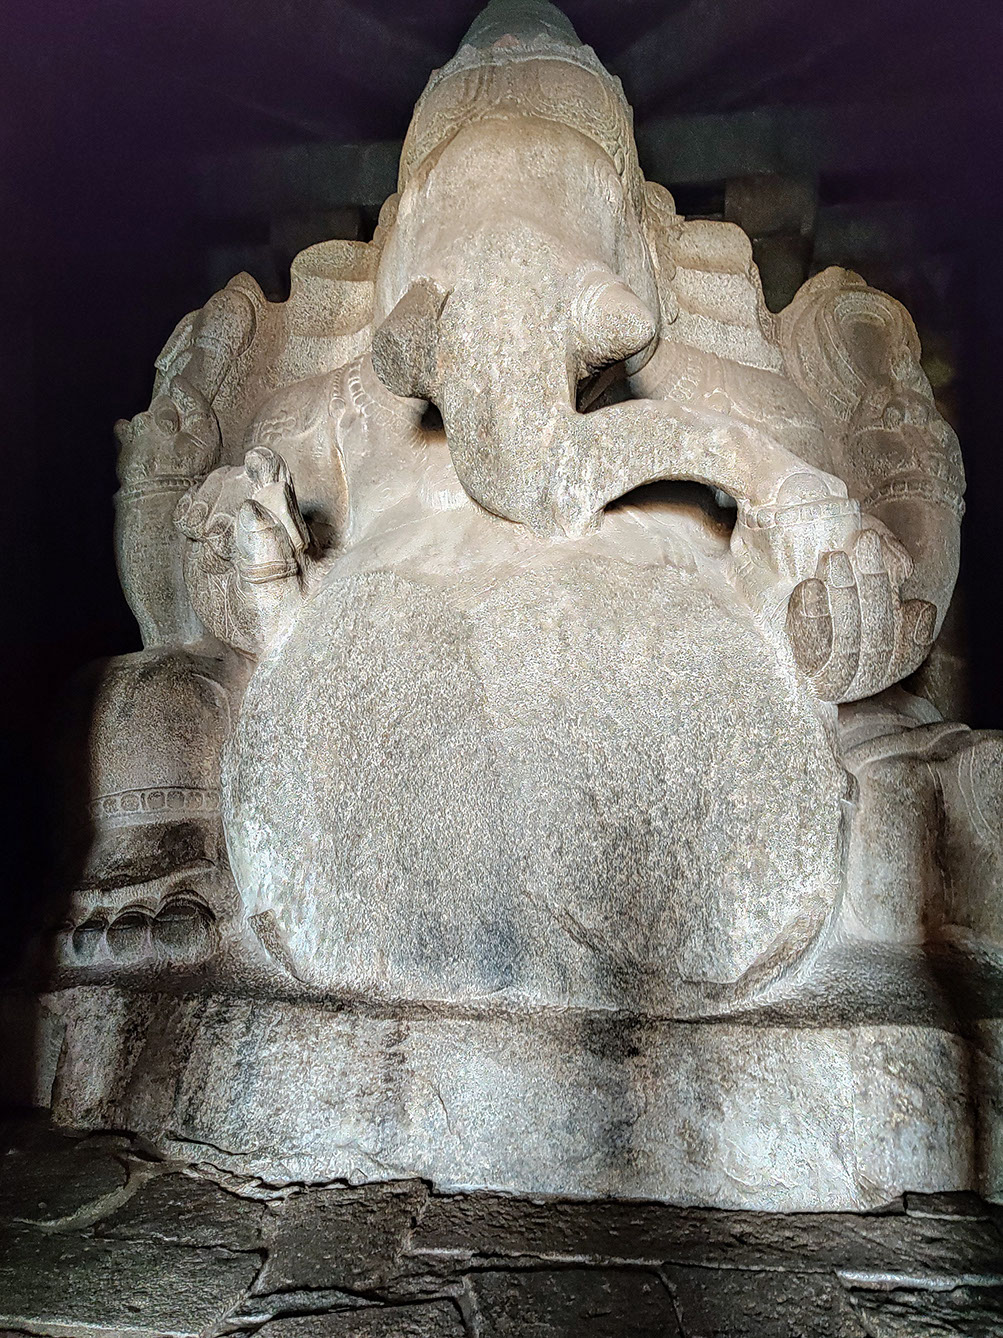 Towering statue of Lord Ganesha in Hampi